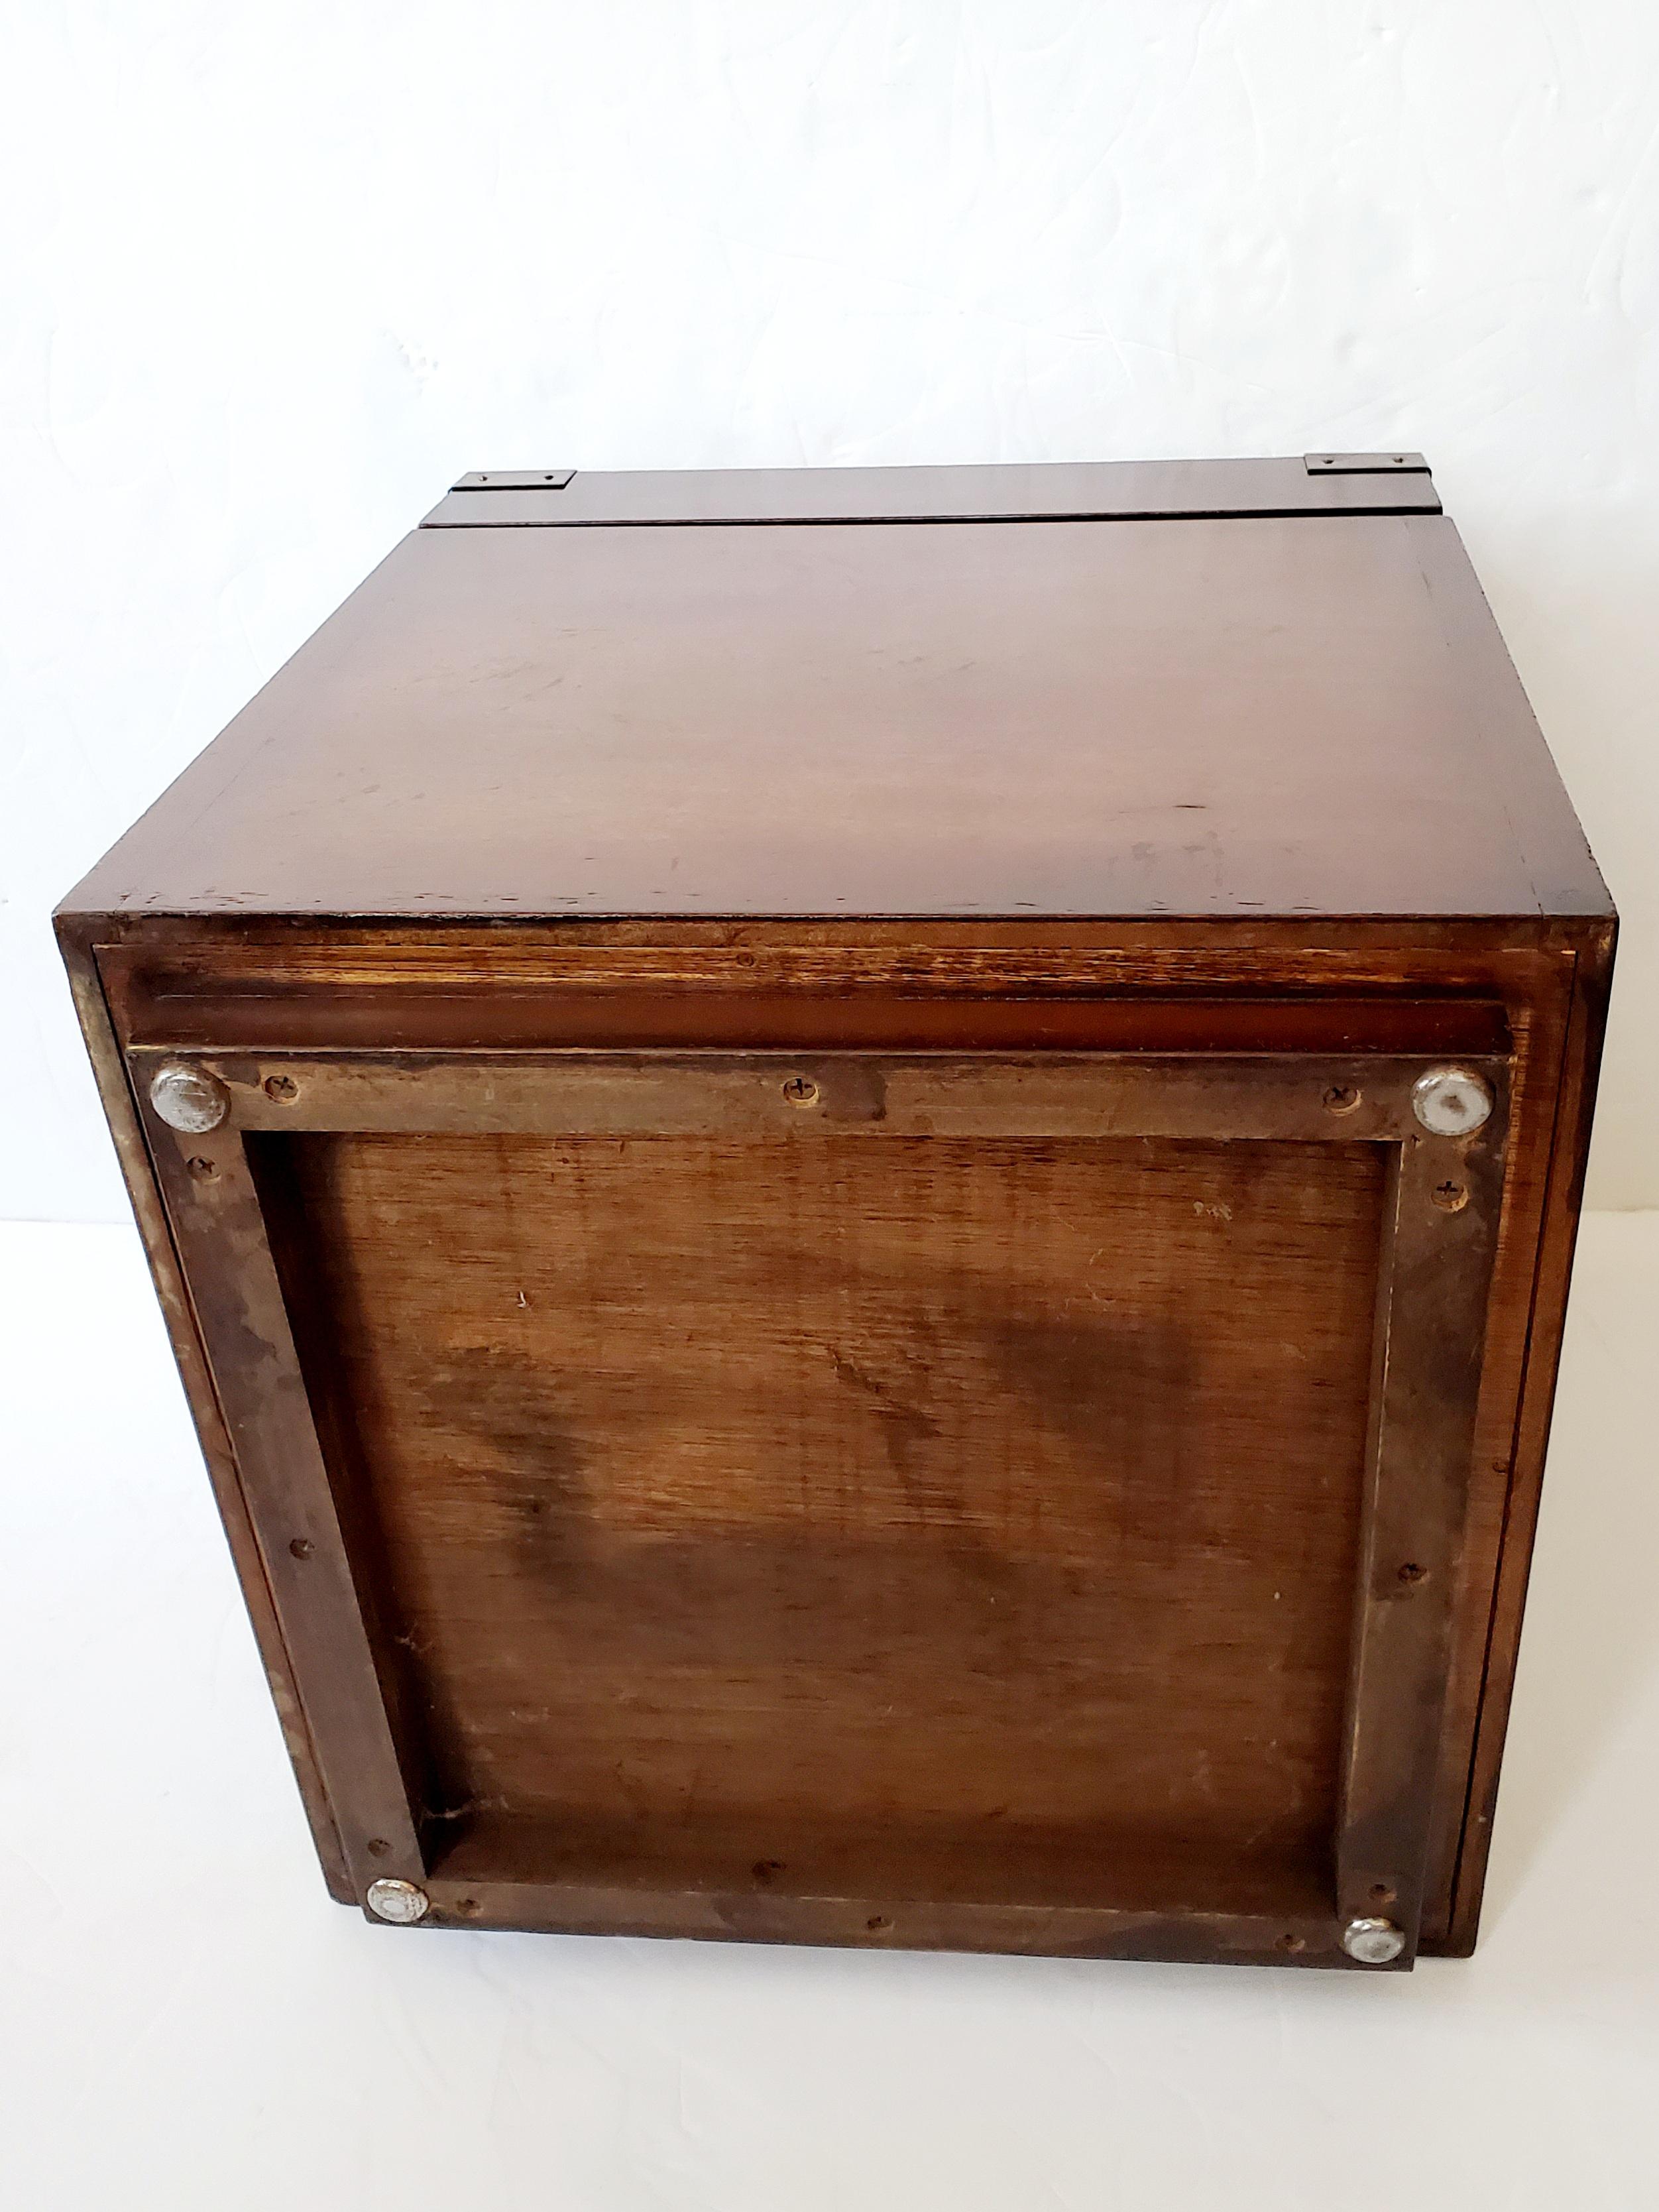 Handsome Cube Shaped Mahogany Trunk End Table with Brass Corners For Sale 7